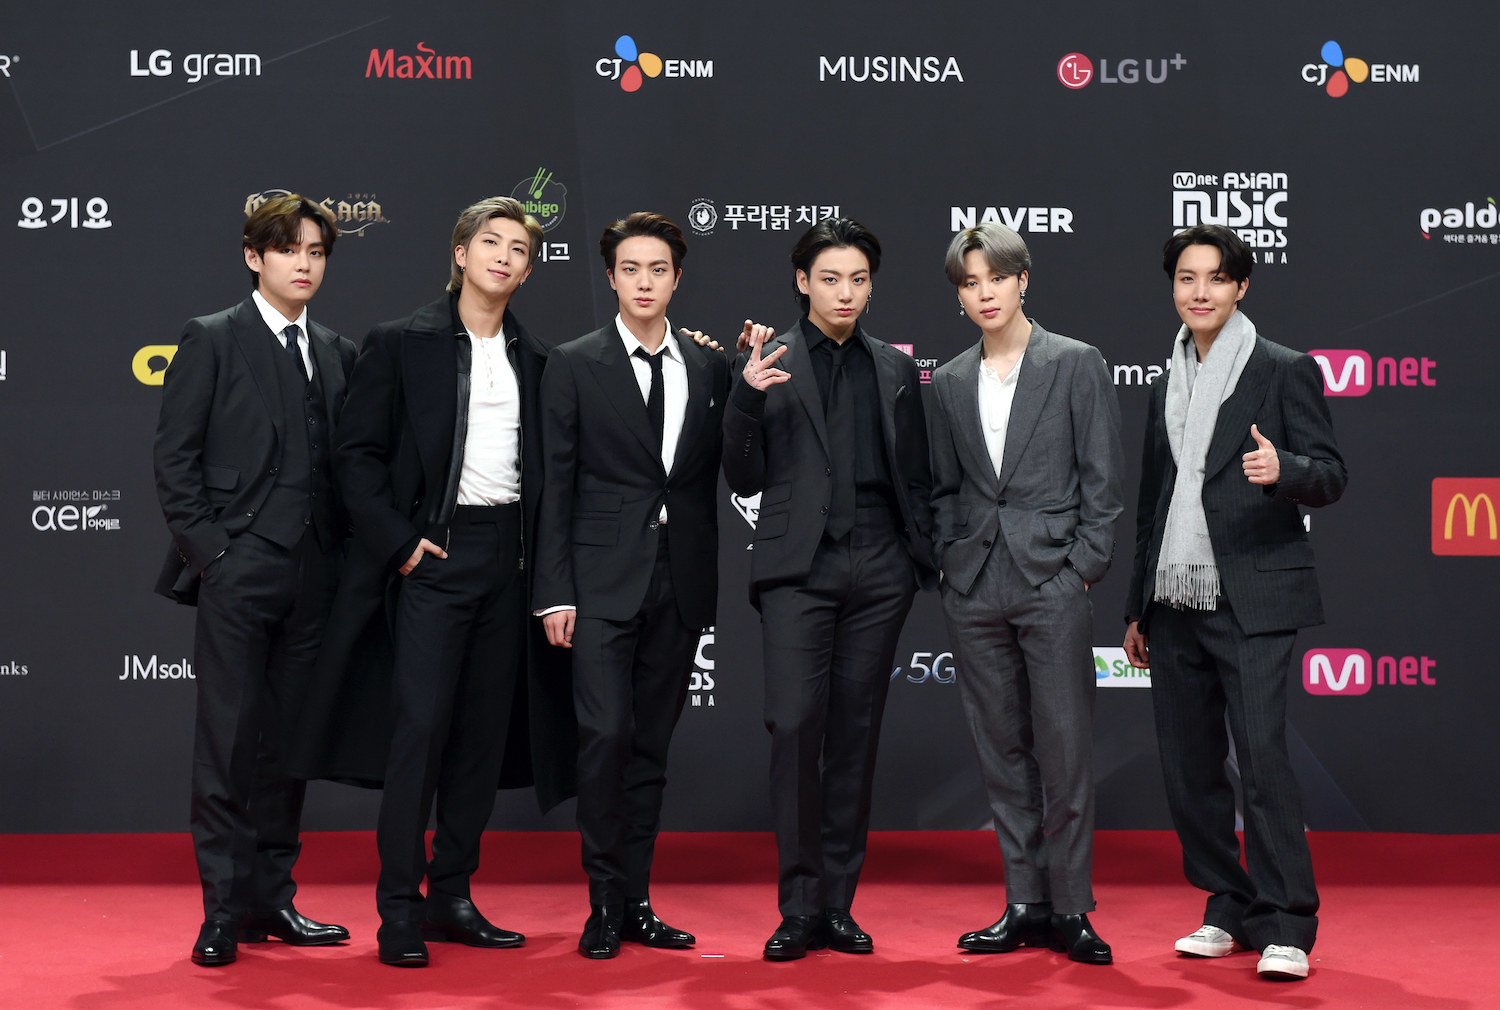 BTS, wearing suits, attends the 2020 Mnet Asian Music Awards